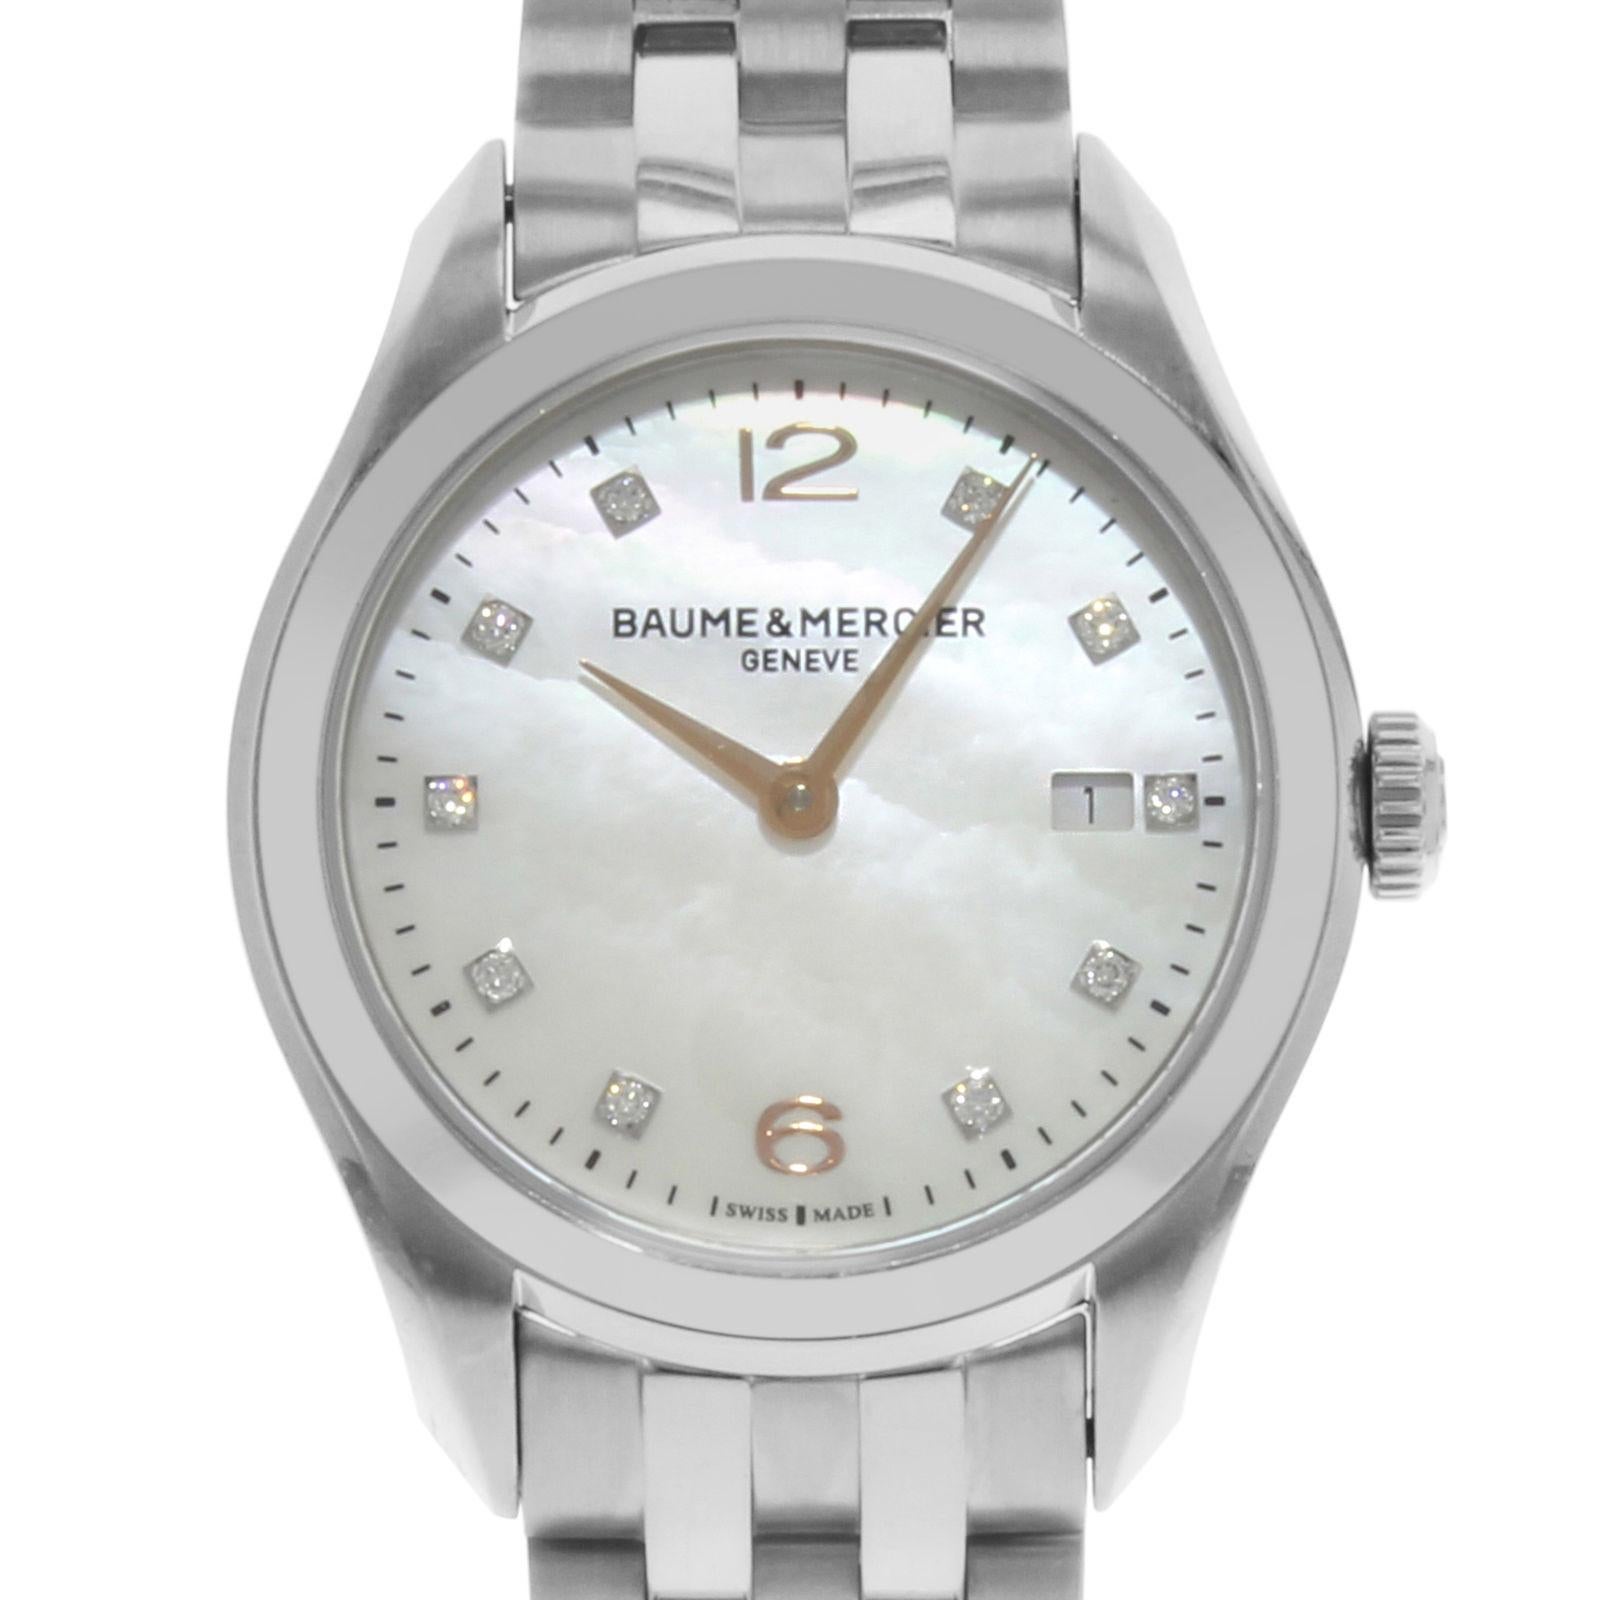 (19230)
This never been worn Baume et Mercier Clifton MOA10176 is a beautiful Ladies timepiece that is powered by a quartz movement which is cased in a stainless steel case. It has a round shape face, date, diamonds dial and has hand diamonds style